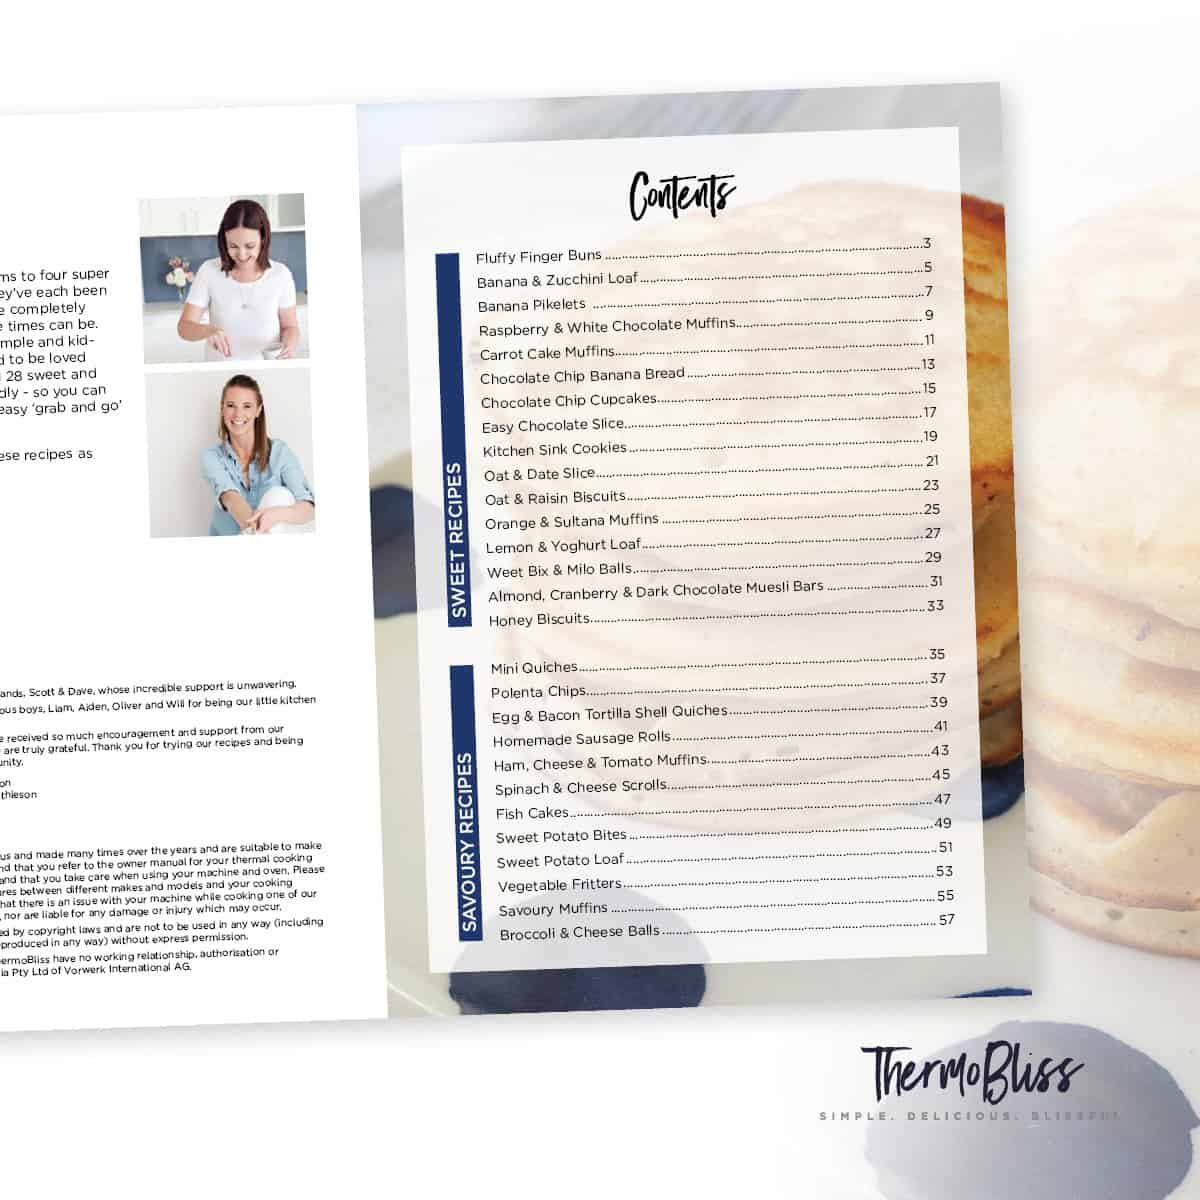 Image of the contents page from the inside of Thermomix Kids Snacks Cookbook.